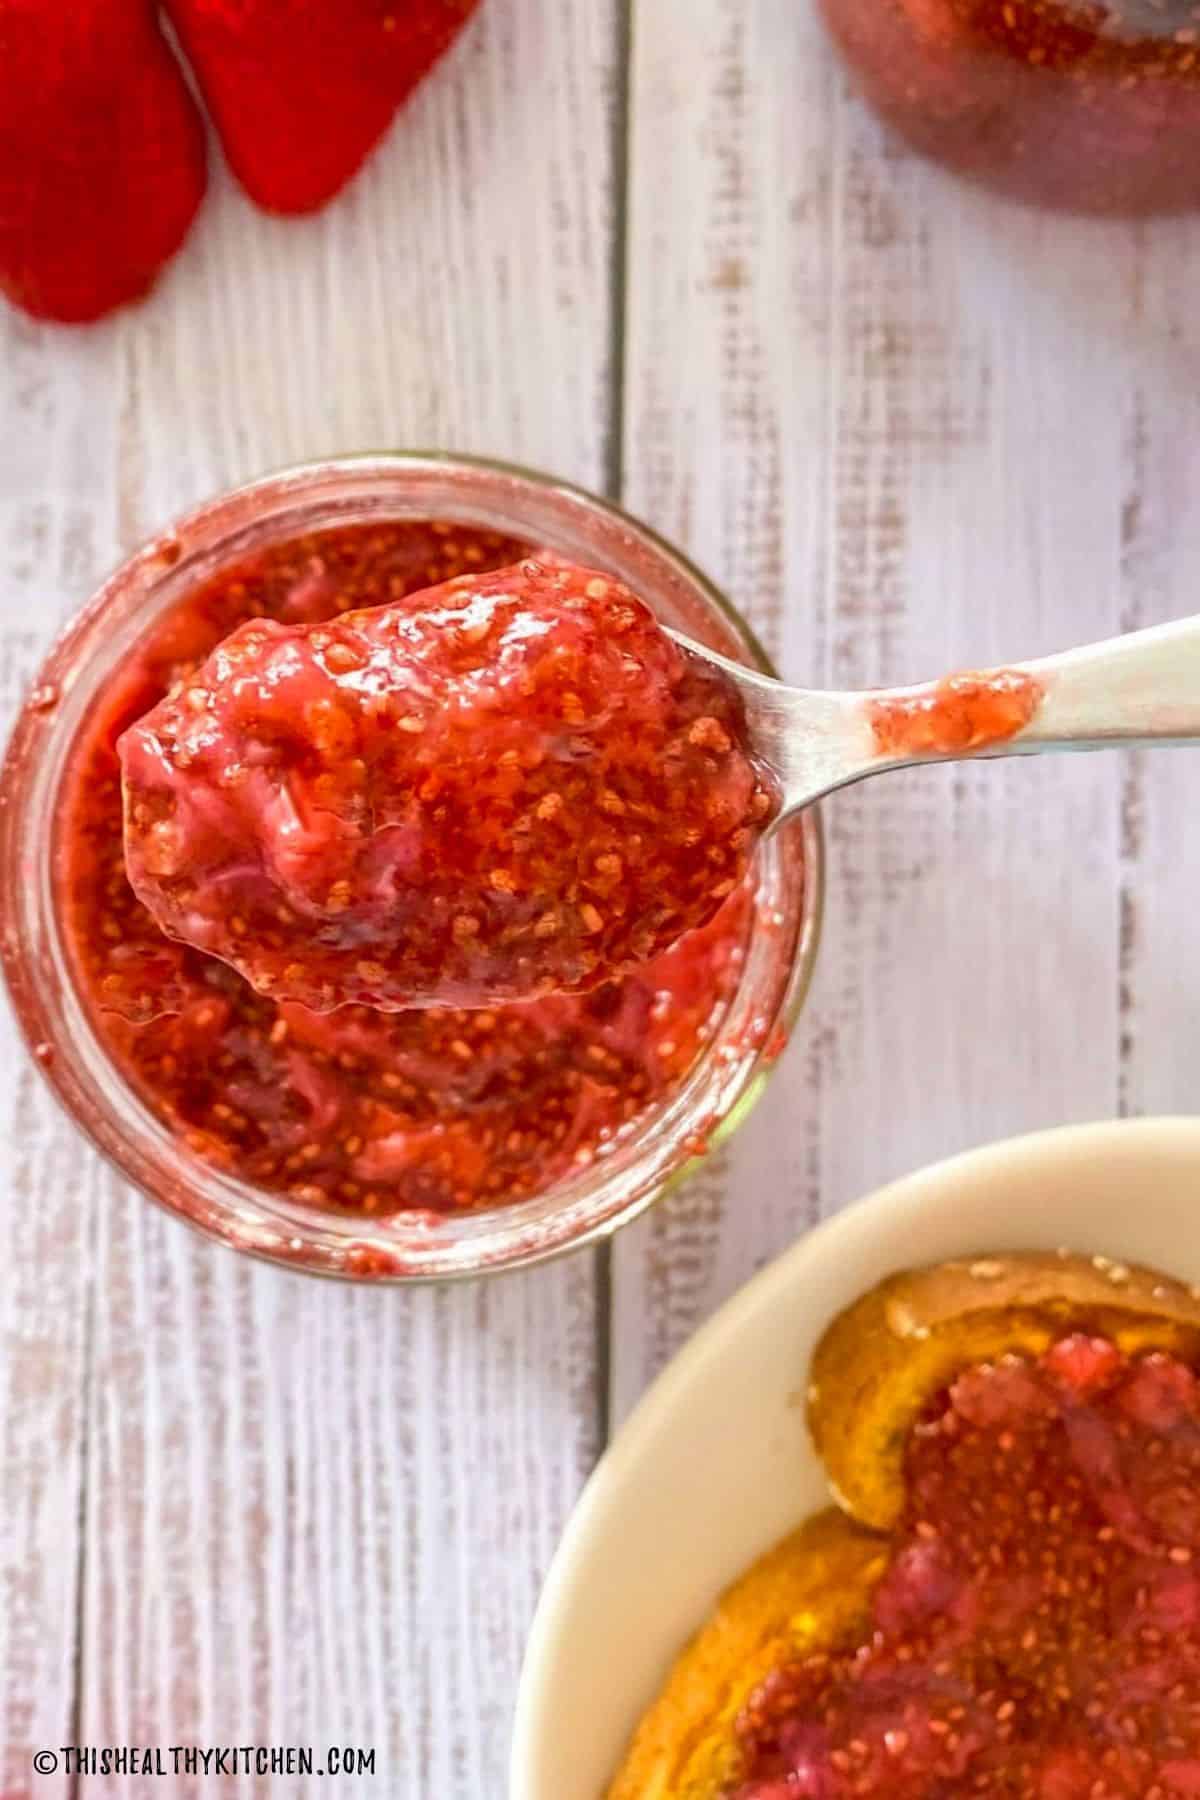 A spoonful of strawberry jam being held above the jar.